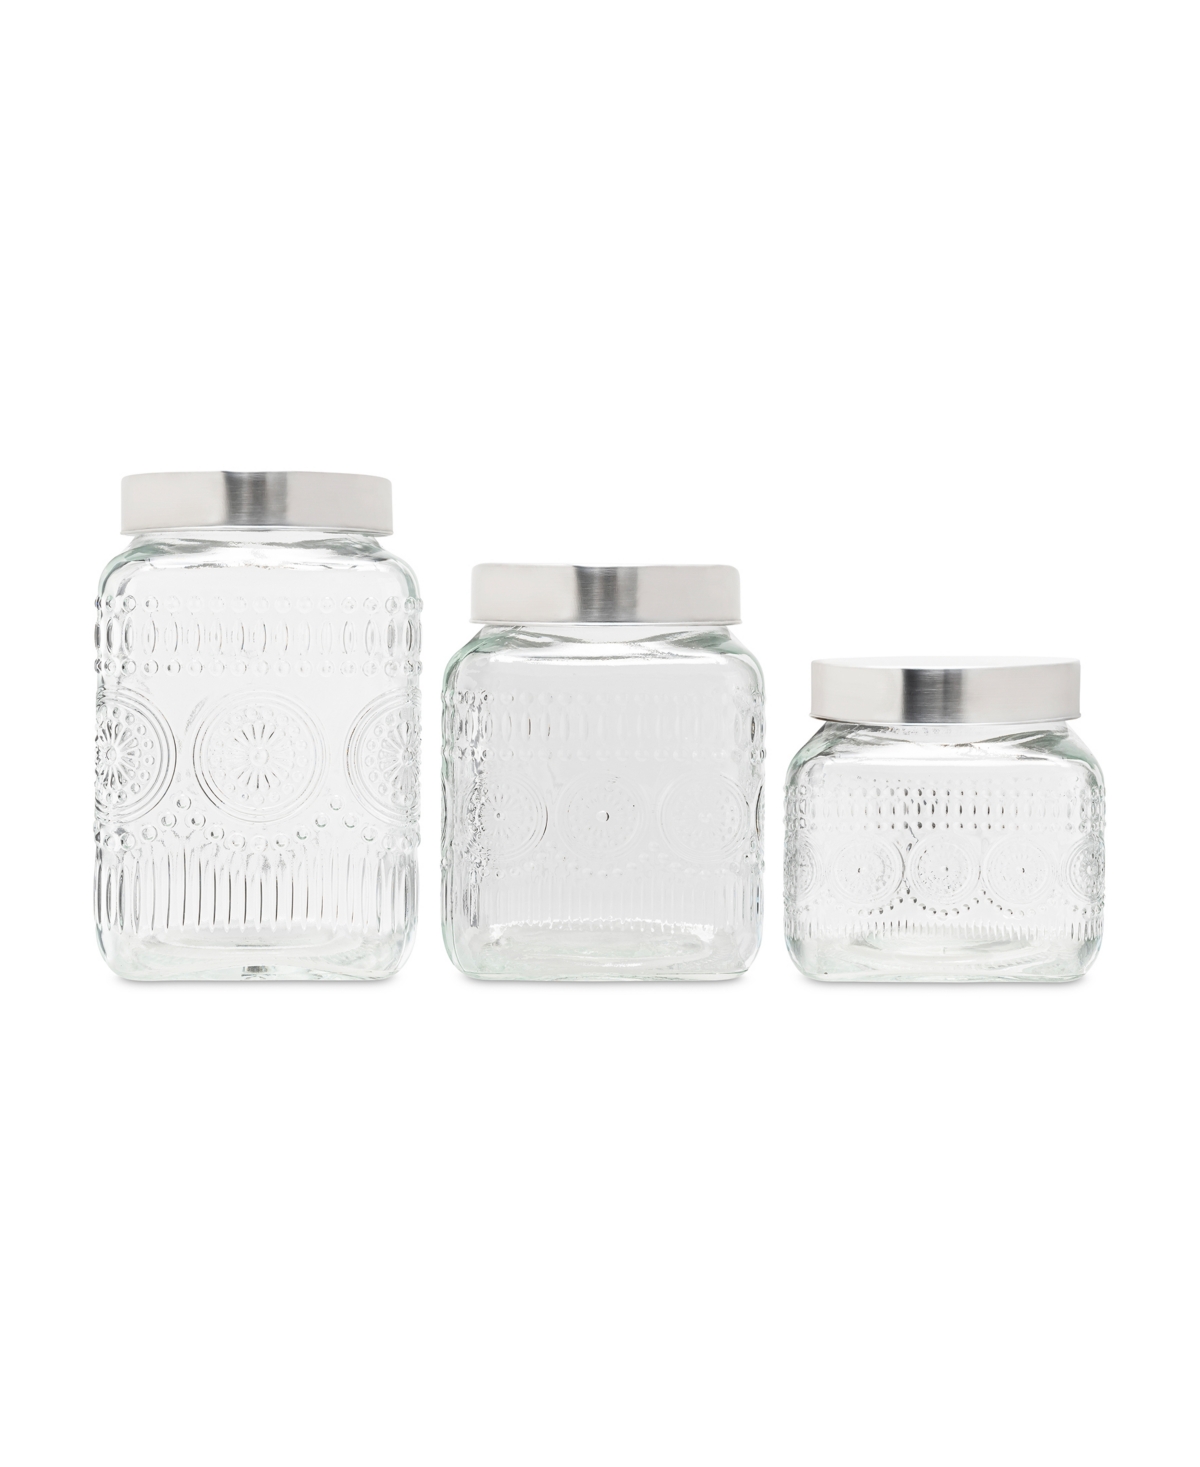 Style Setter Retro Design Glass Canister Set, 3 Piece In Clear